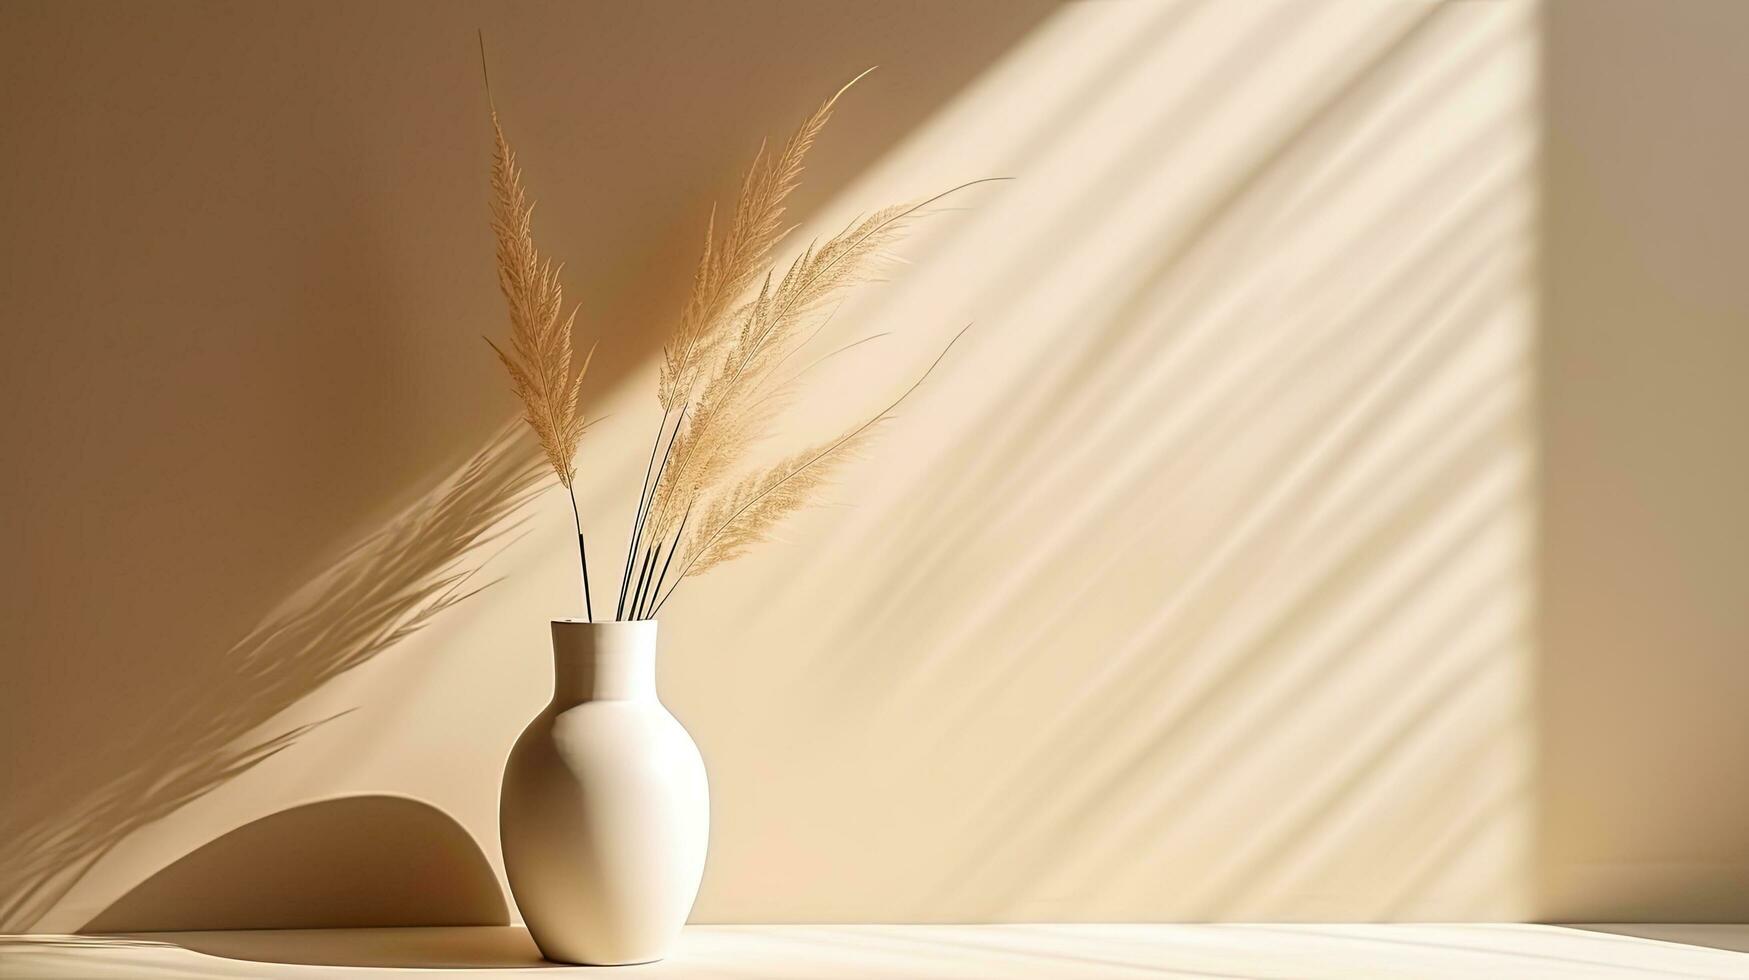 Dry pampas grass in chic vase Shadows on wall Silhouette in sunlight Minimalistic decor idea photo